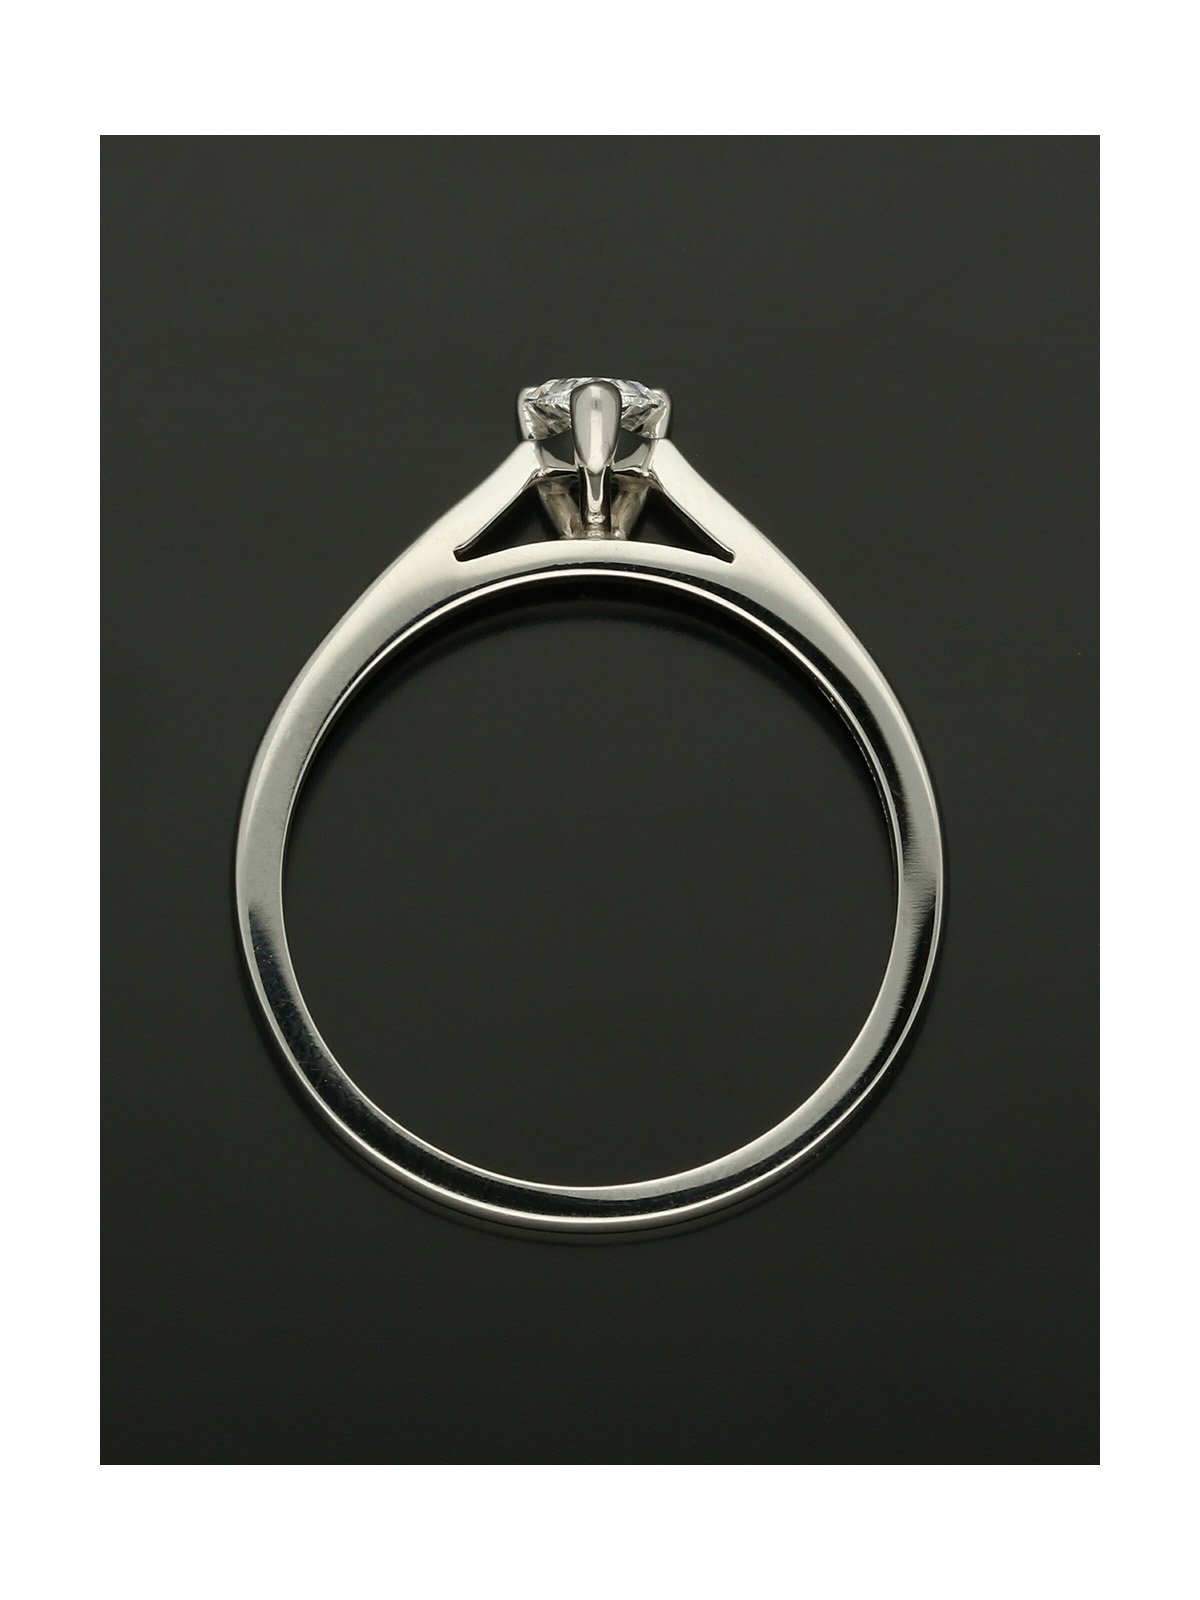 Diamond Solitaire Engagement Ring "The Sophia Collection" Certificated 0.30ct Pear Cut in Platinum